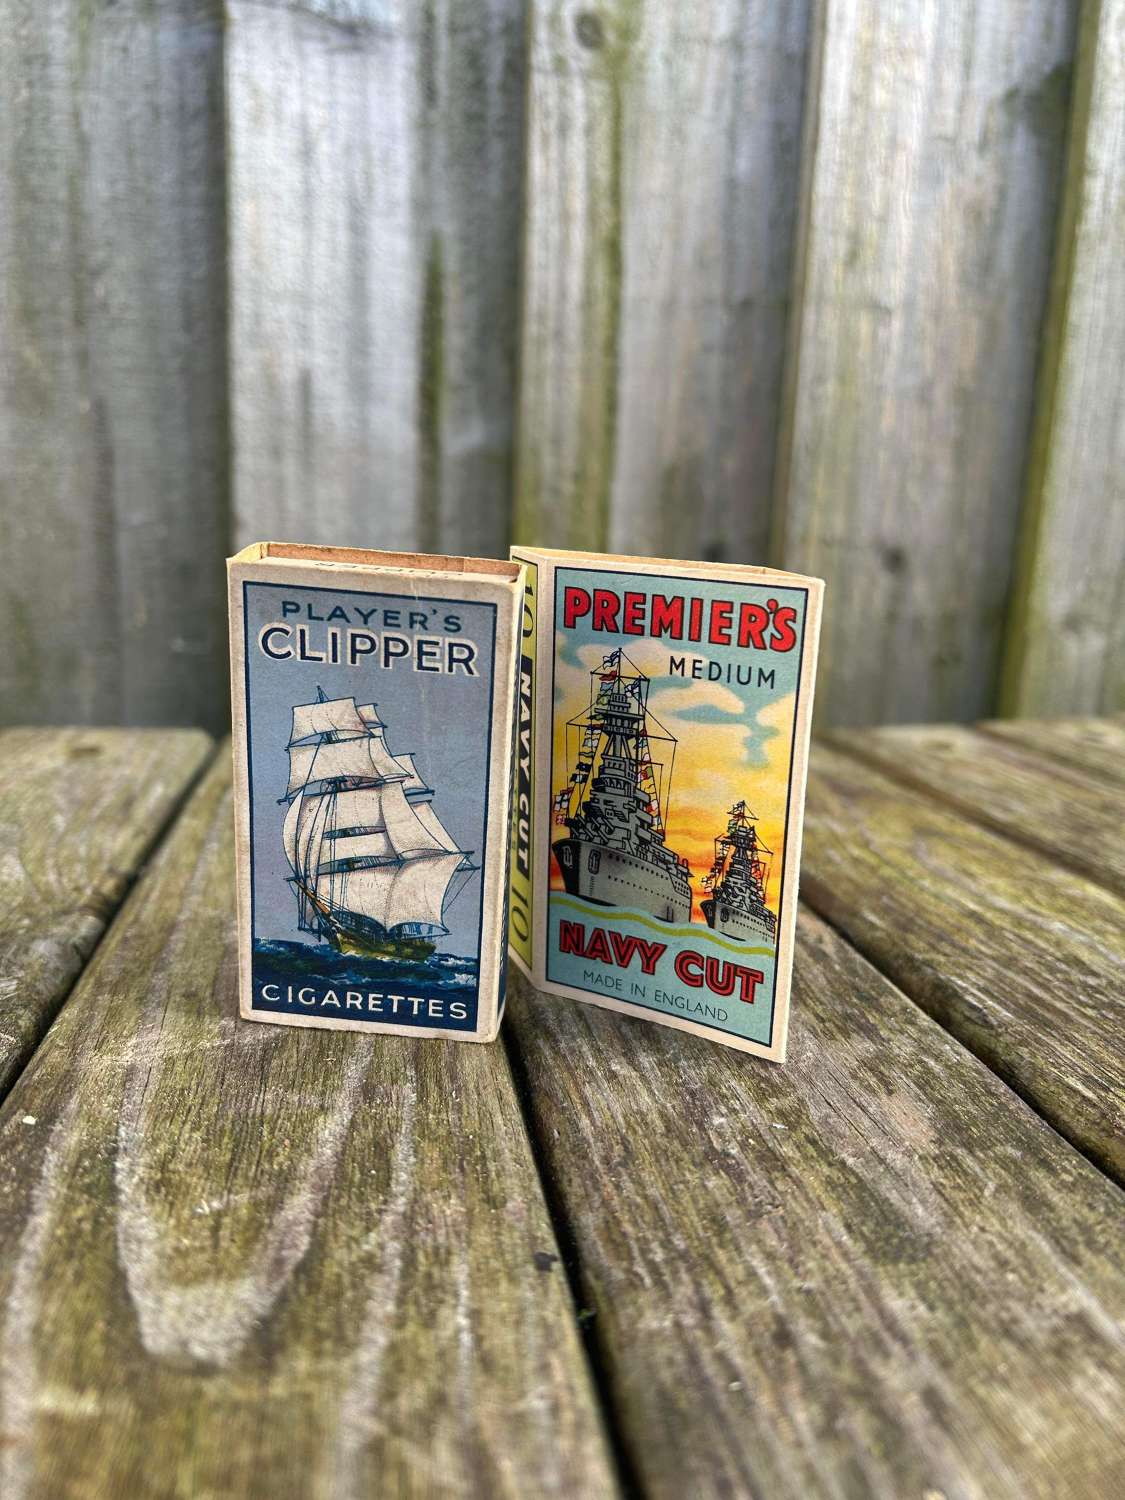 Players clipper and premier cigarette packet